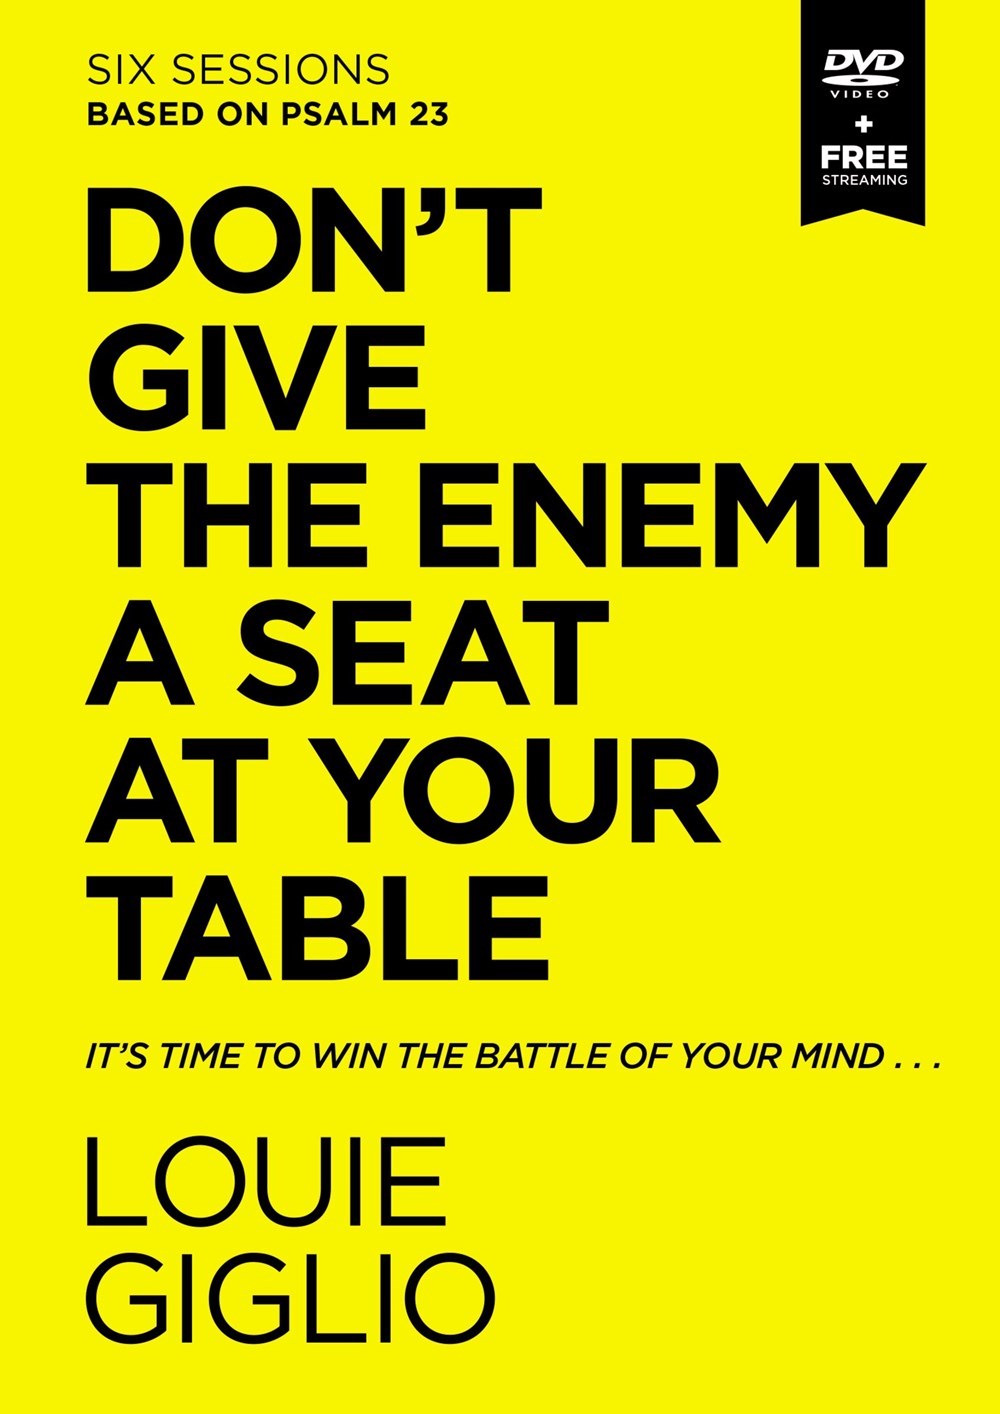 Don't Give The Enemy A Seat At Your Table Video Study